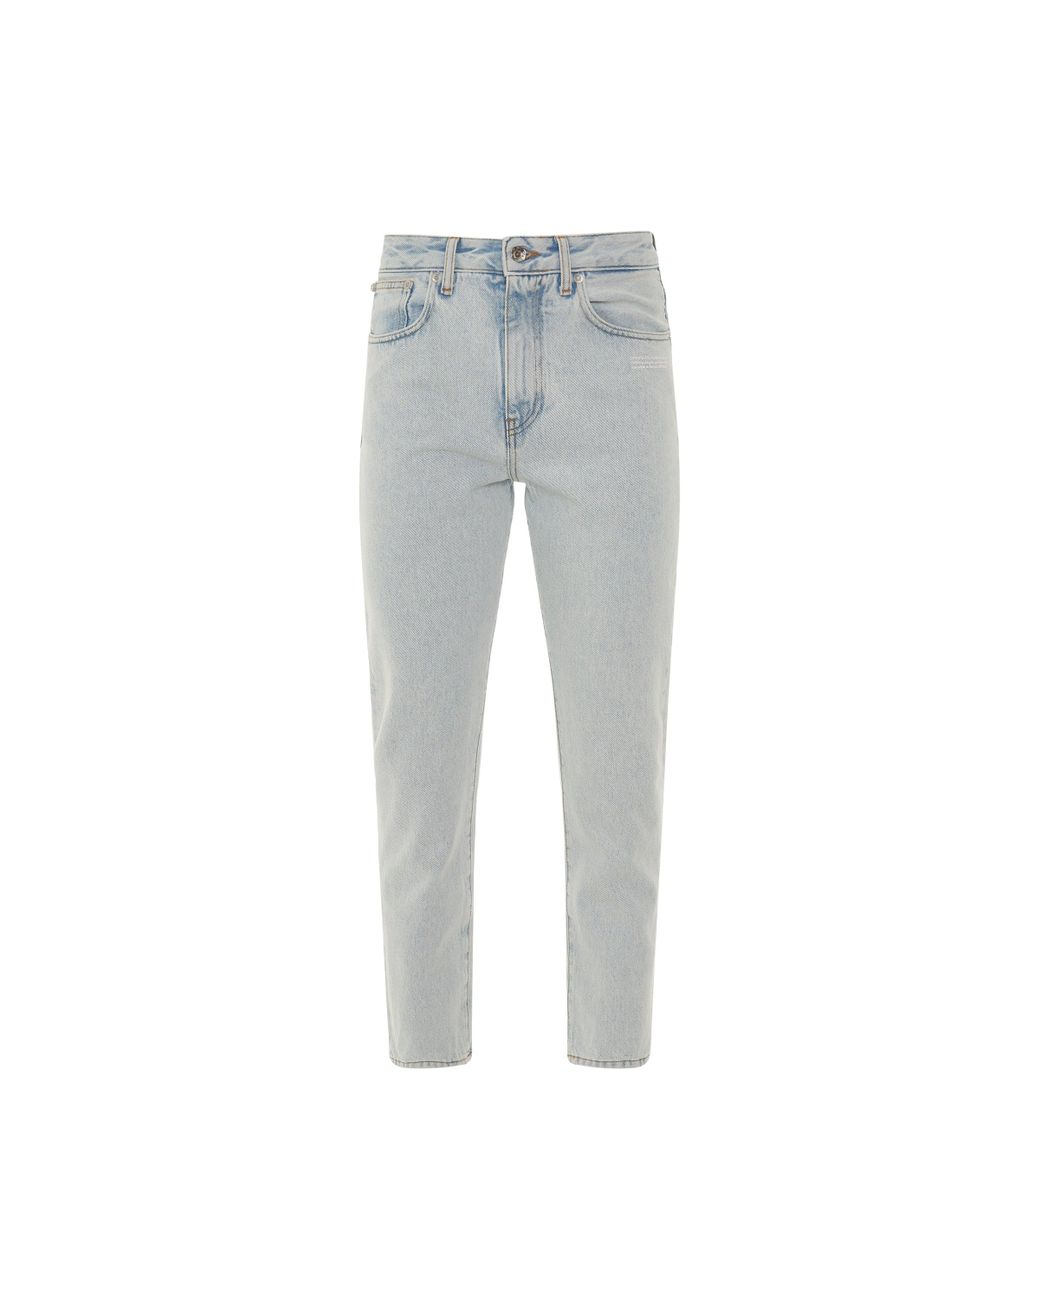 Off-White c/o Virgil Abloh Denim Jeans In Grey Cotton in Grey Save 49% Womens Clothing Jeans Straight-leg jeans 